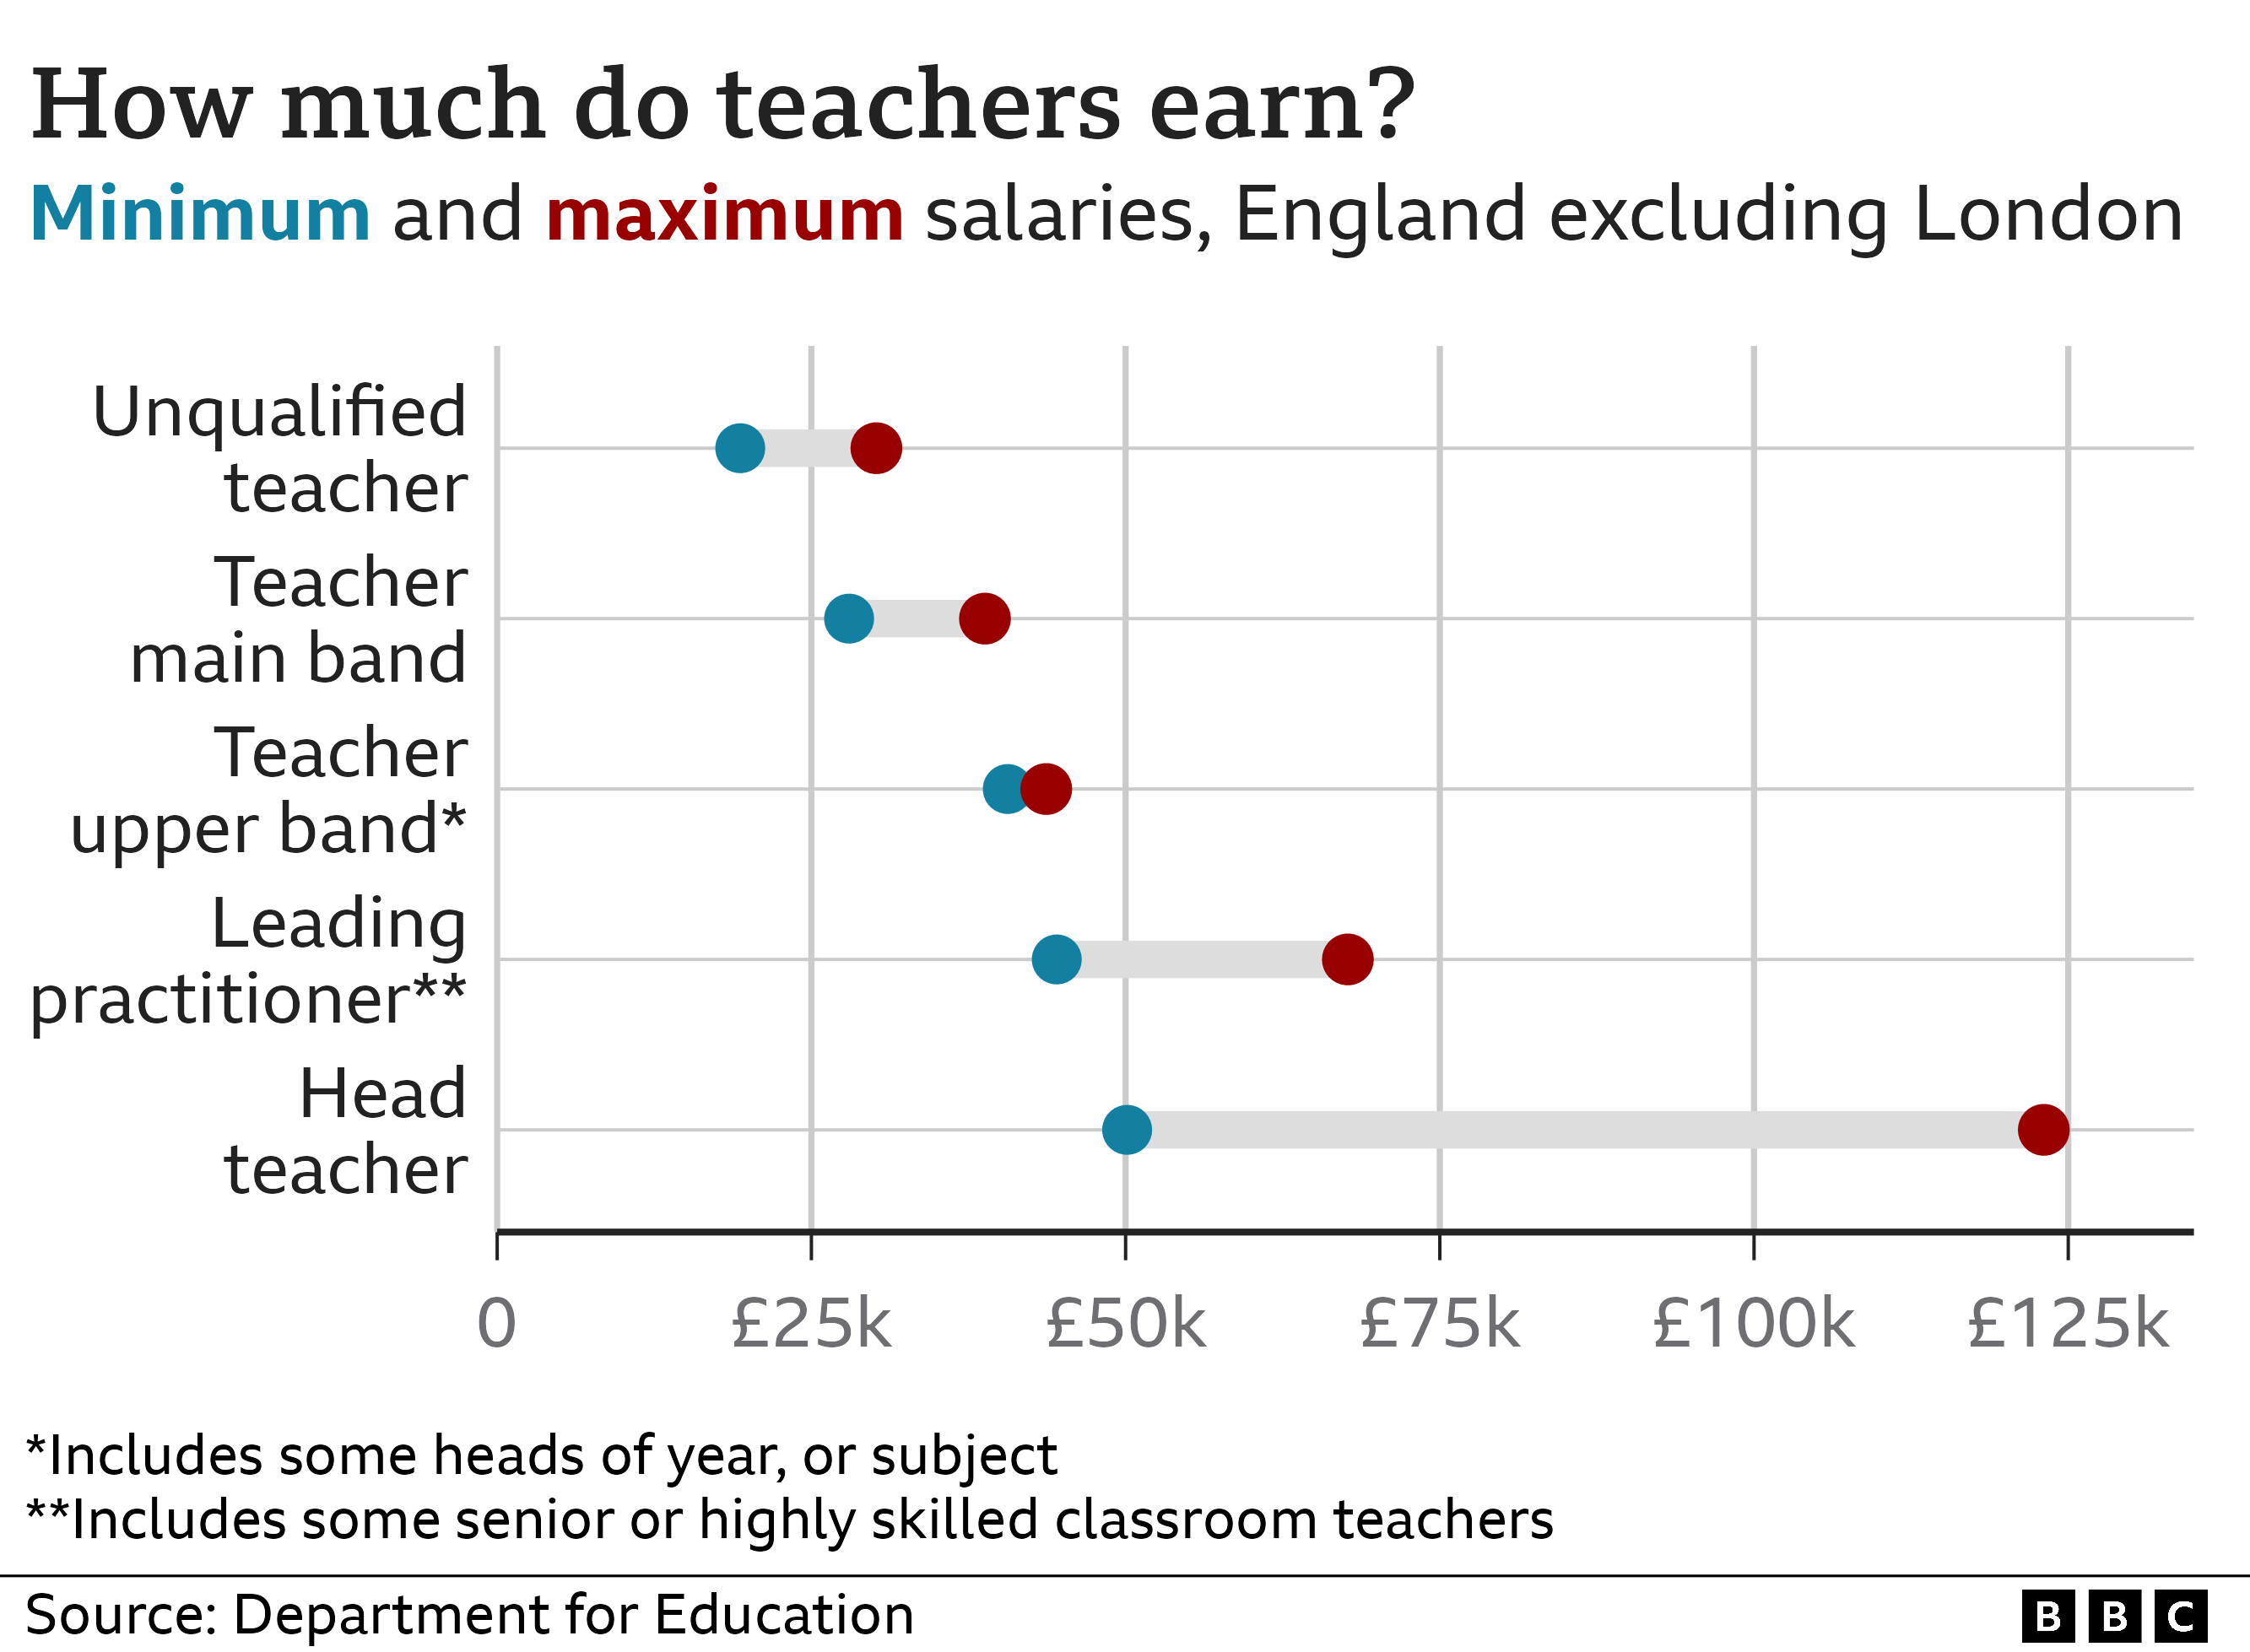 Graphic showing how much teachers earn in England